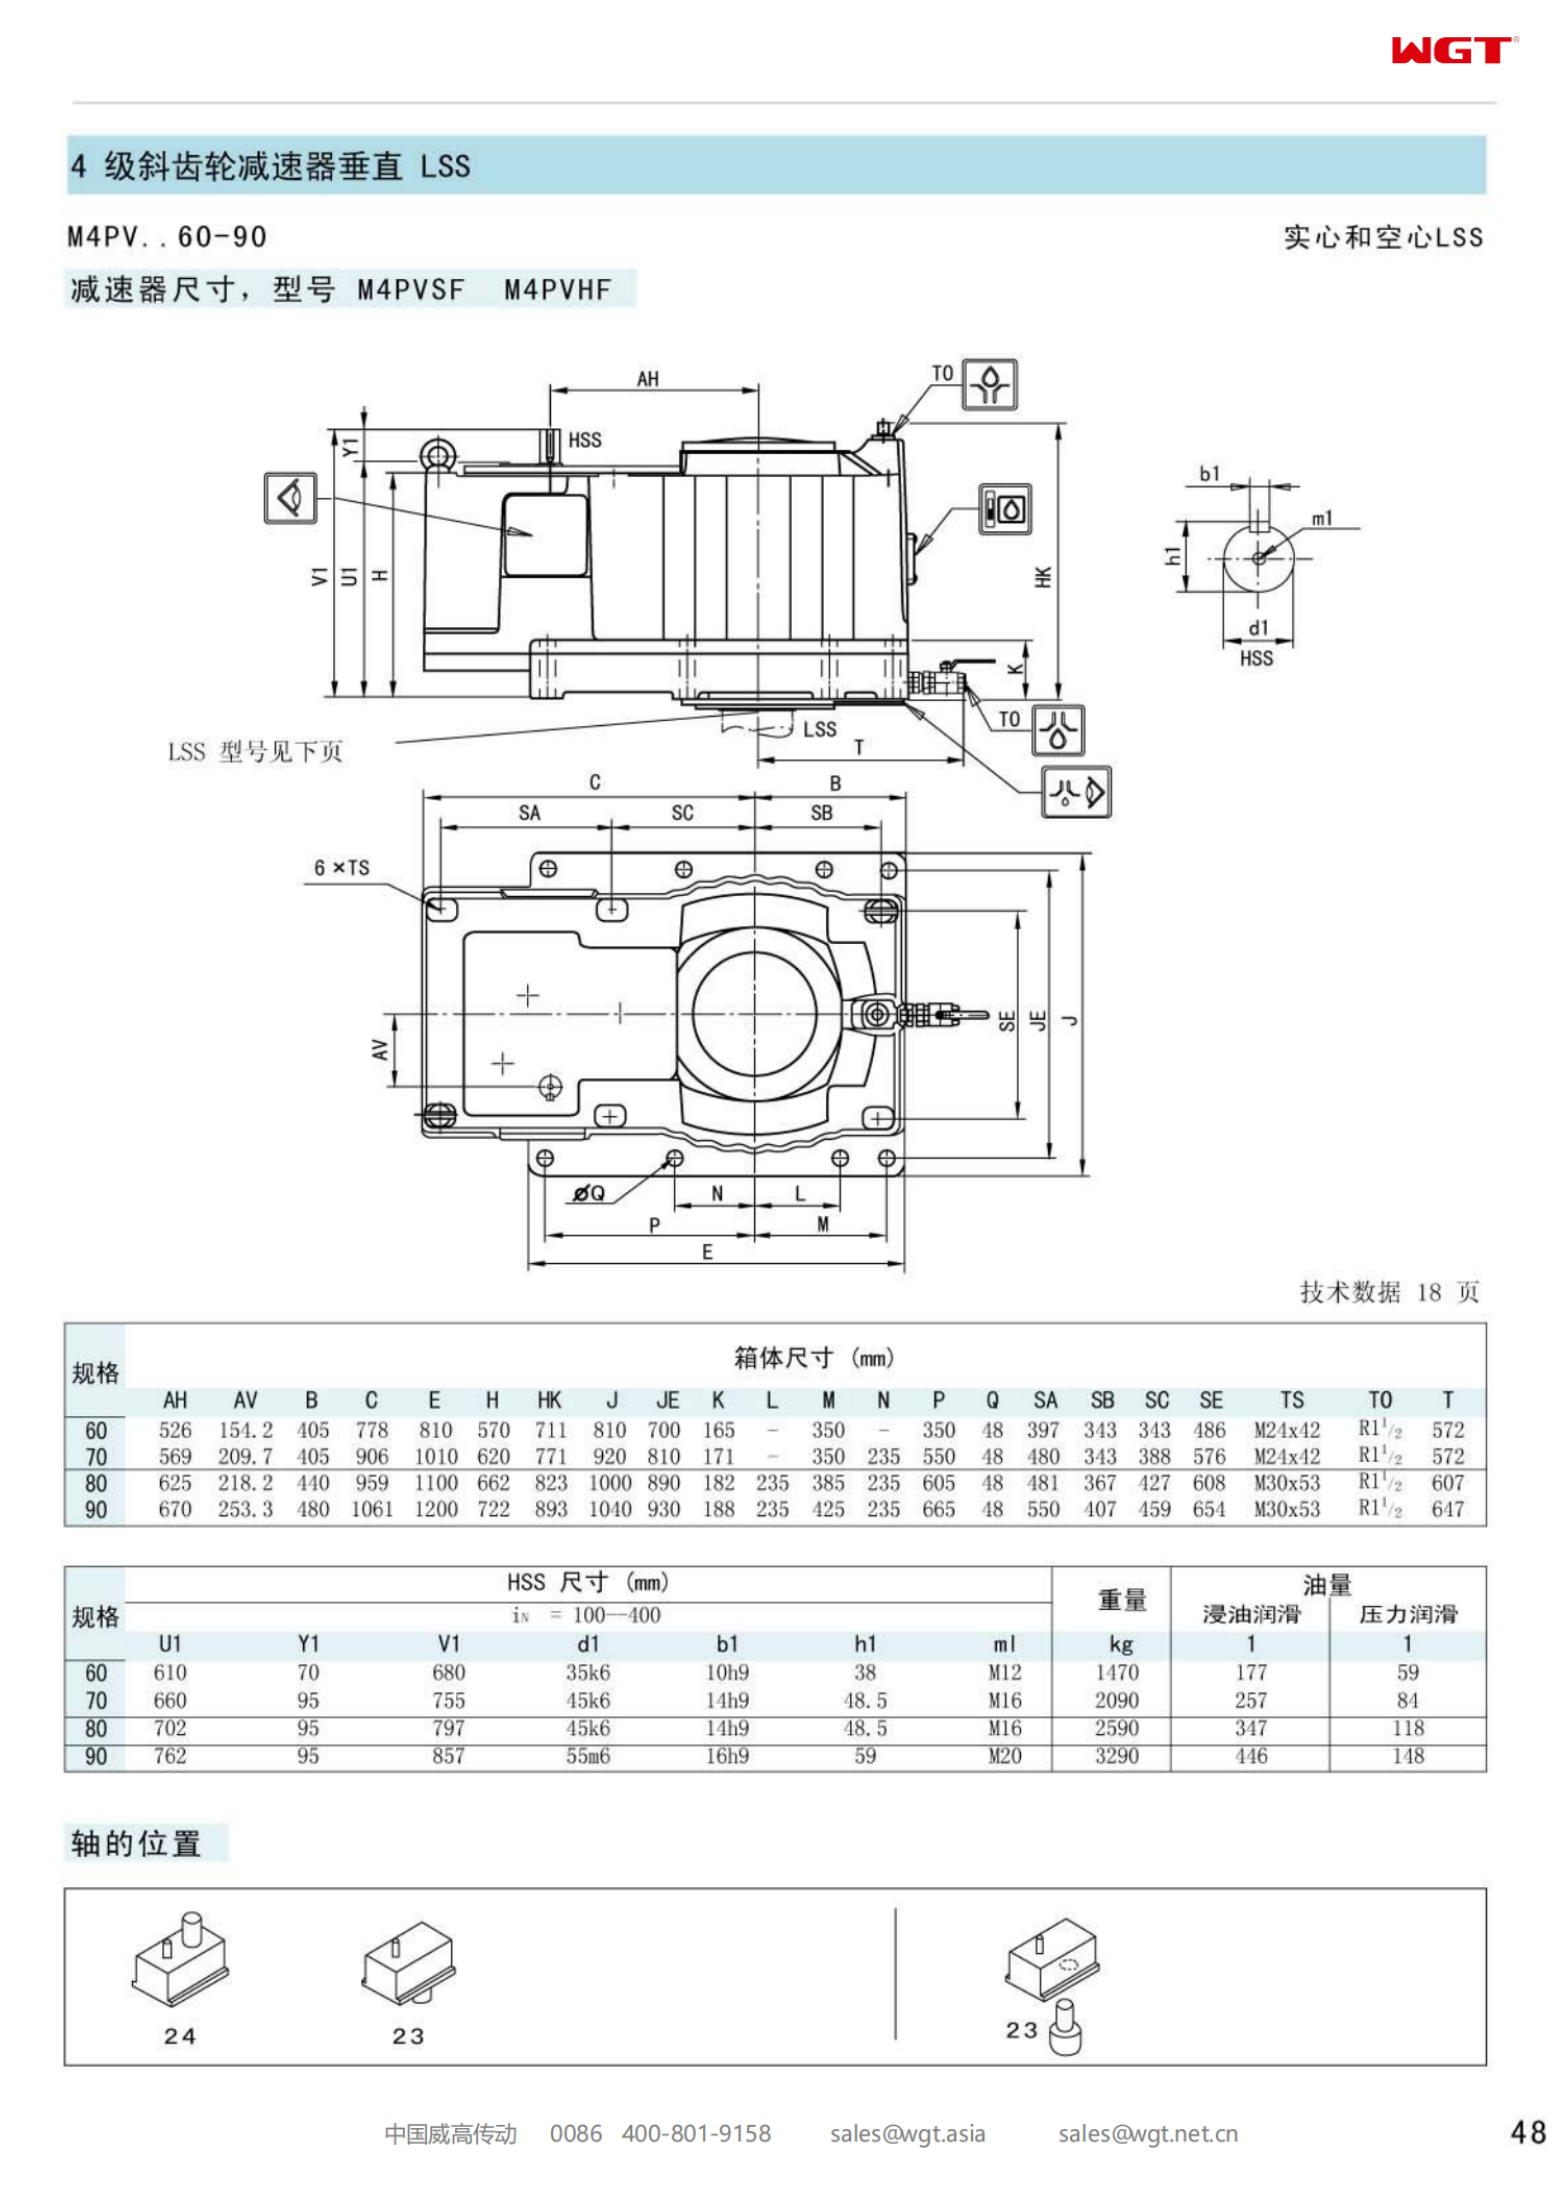 M4PVSF90 Replace_SEW_M_Series Gearbox